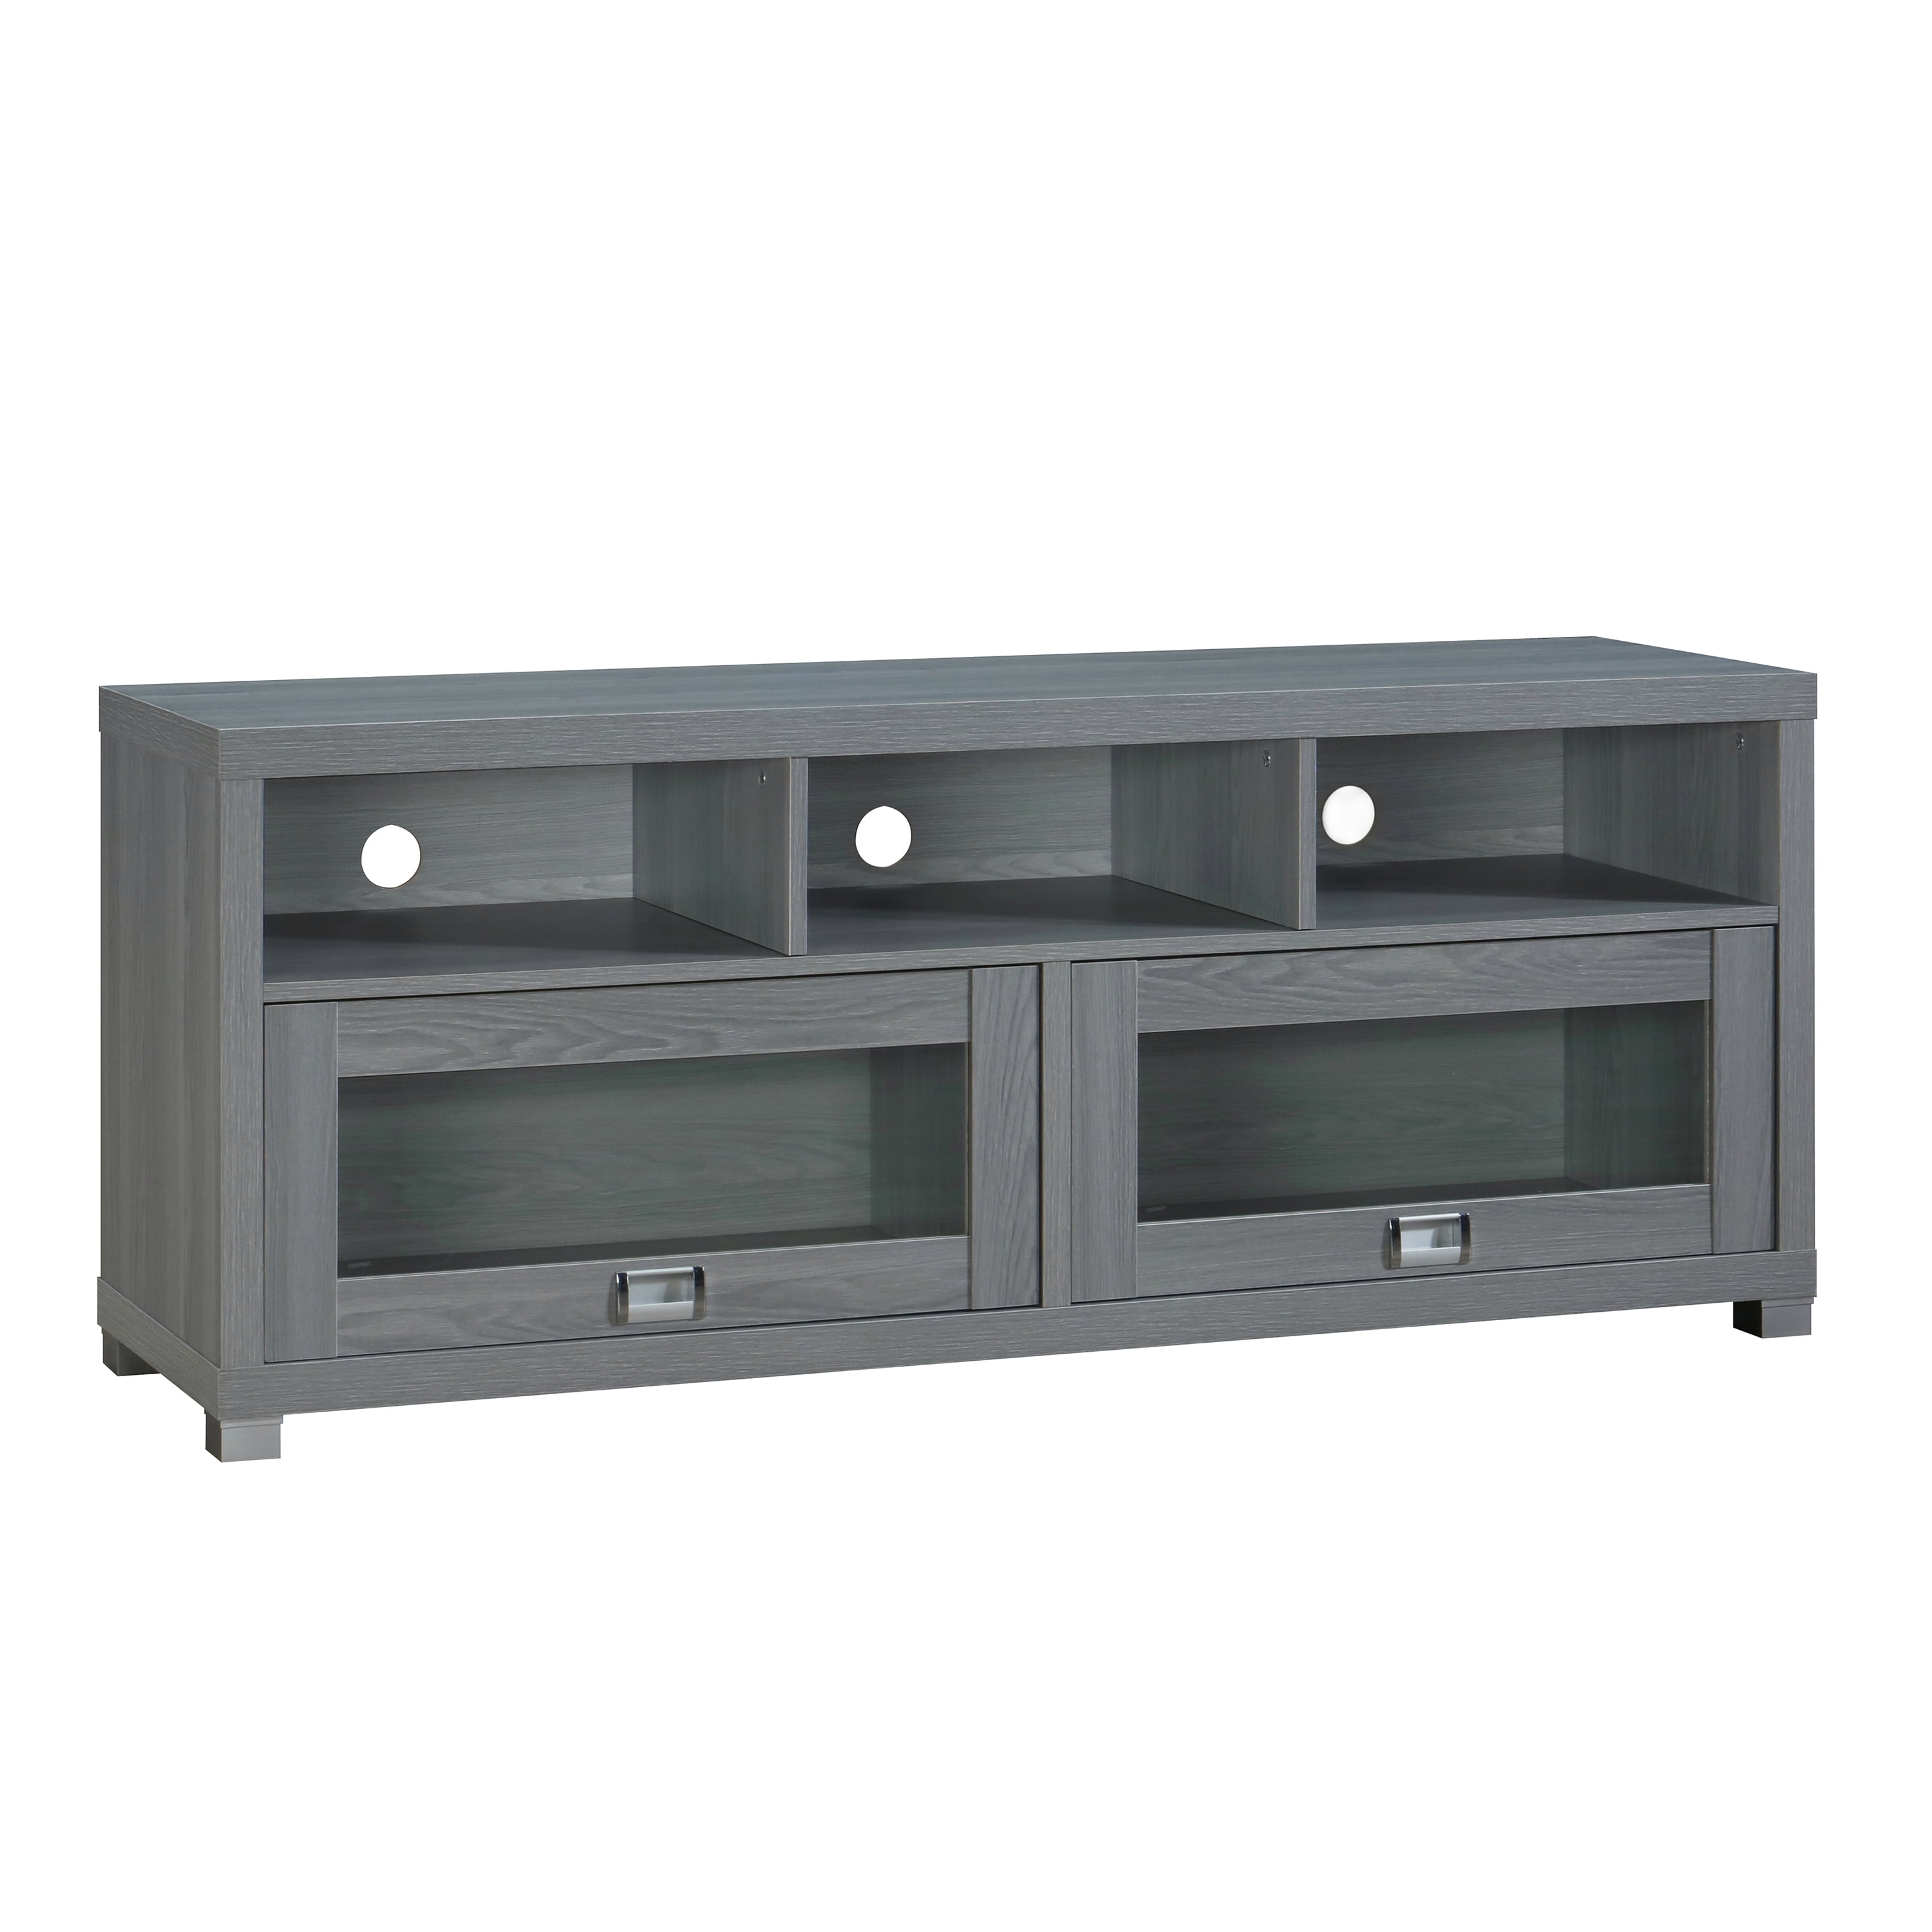 Espresso Wood 58 Durbin TV Stand For TVs Up To 75 Home Entertainment Center 